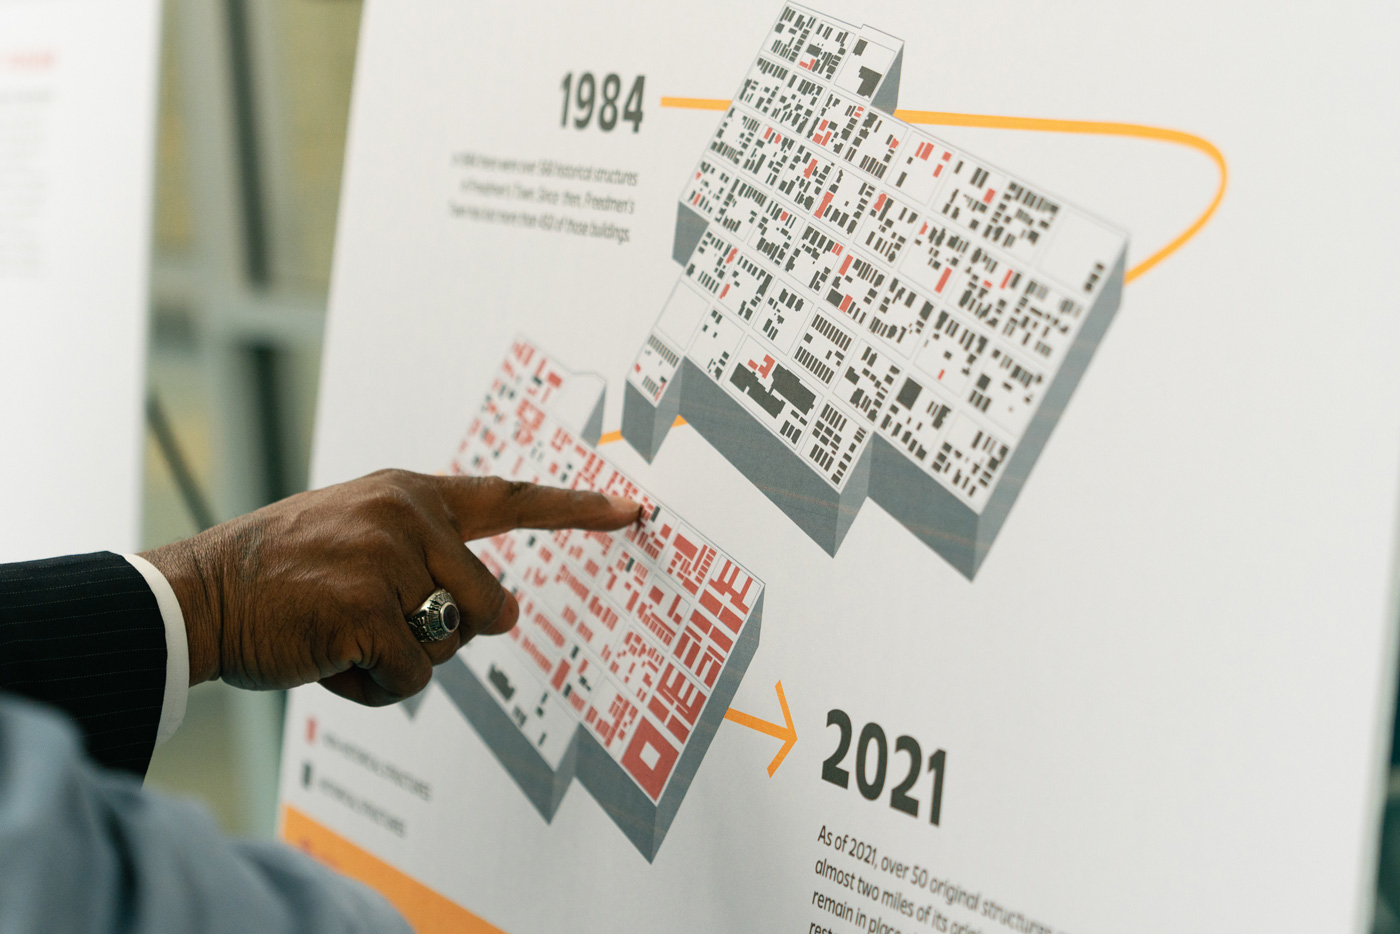 Attendees of the Rebirth in Action town hall meeting at Carnegie Vanguard High School participate in a survey about initiatives for the historic Freedmen’s Town district.